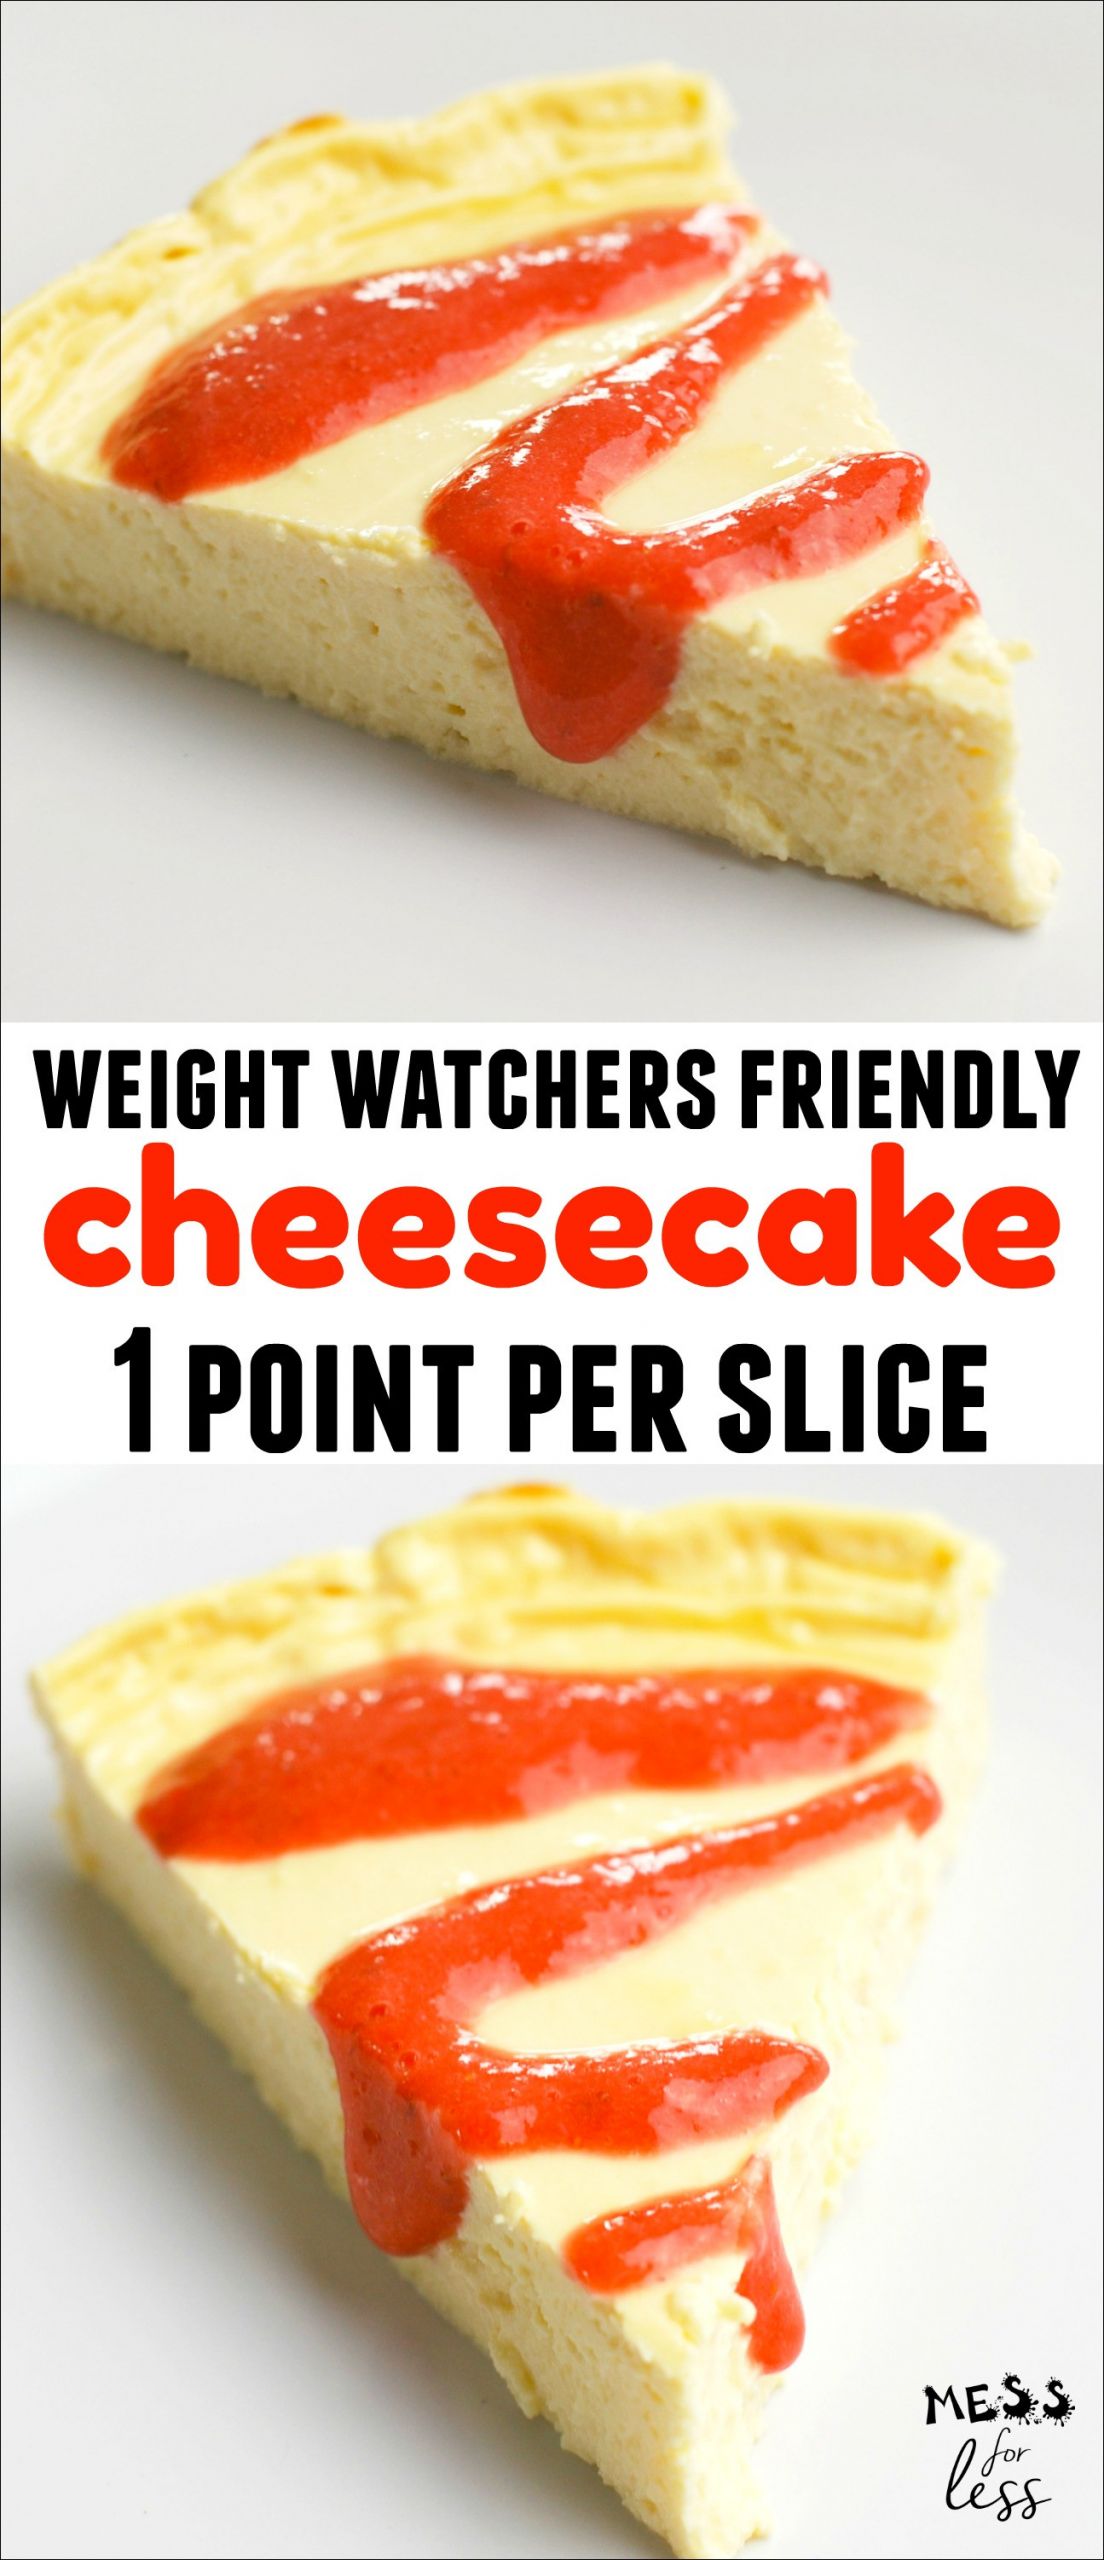 Weight Watchers Cheese Cake Recipe
 e Point Cheesecake Weight Watchers Friendly Mess for